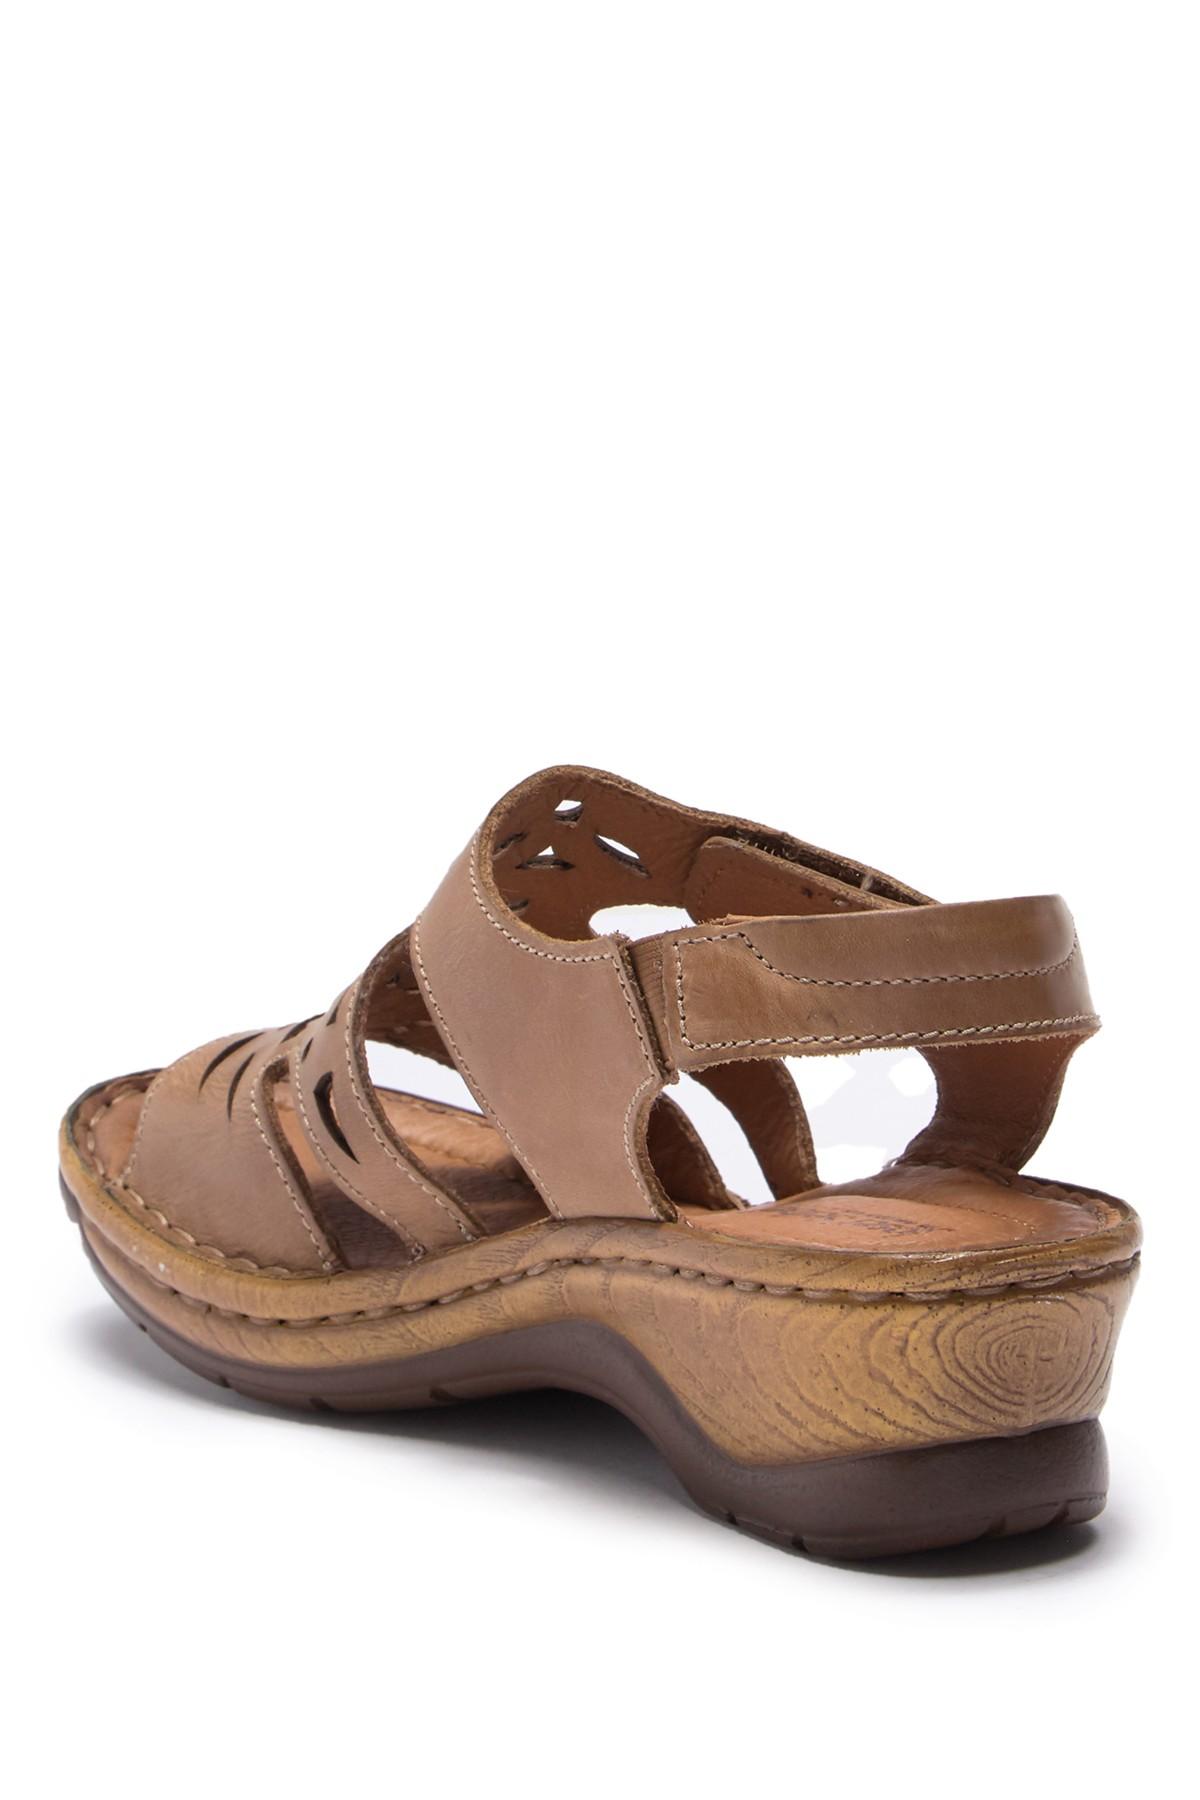 Josef Seibel Leather Catalonia 56 Wedge Sandal in Sand ca (Brown) - Lyst